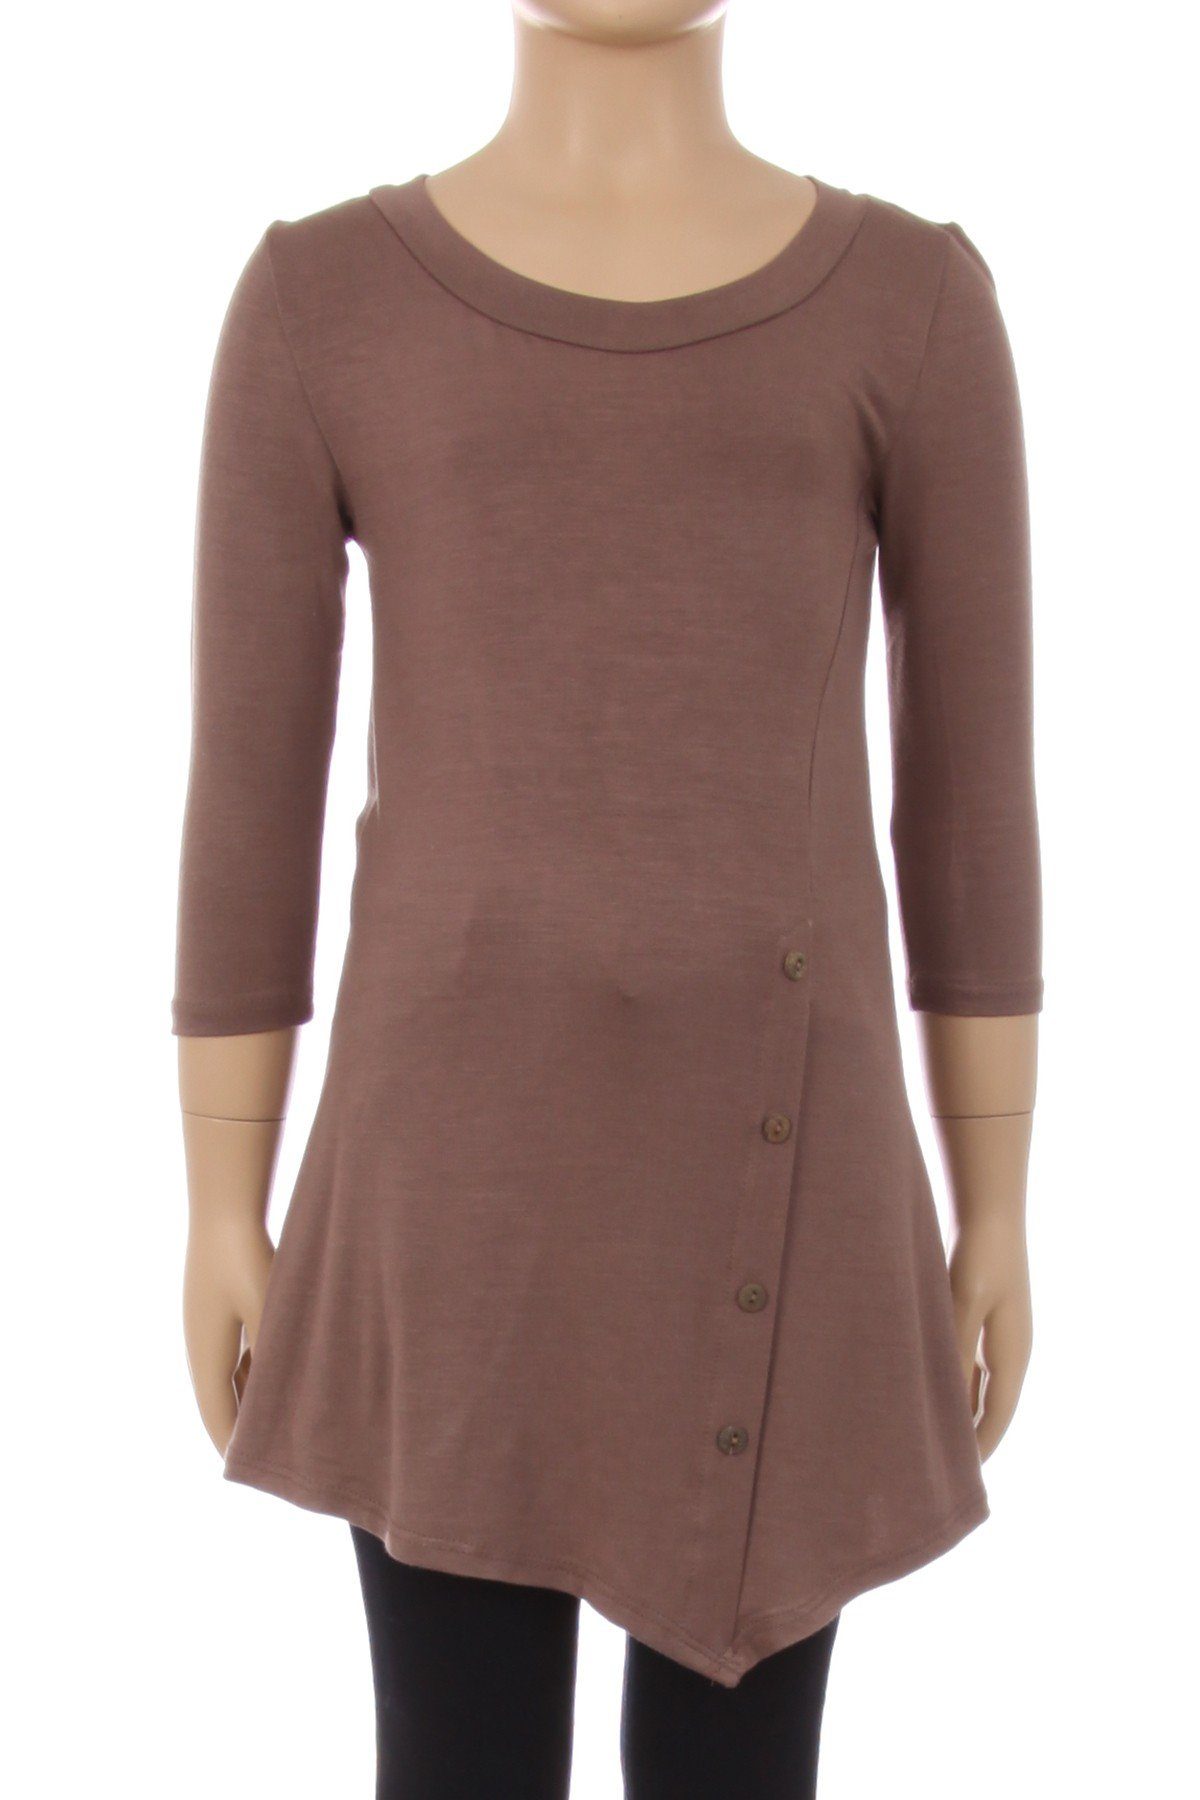 Girls Solid Brown Dress Asymmetric 3/4 Sleeve Tunic Top Tops MomMe and More 